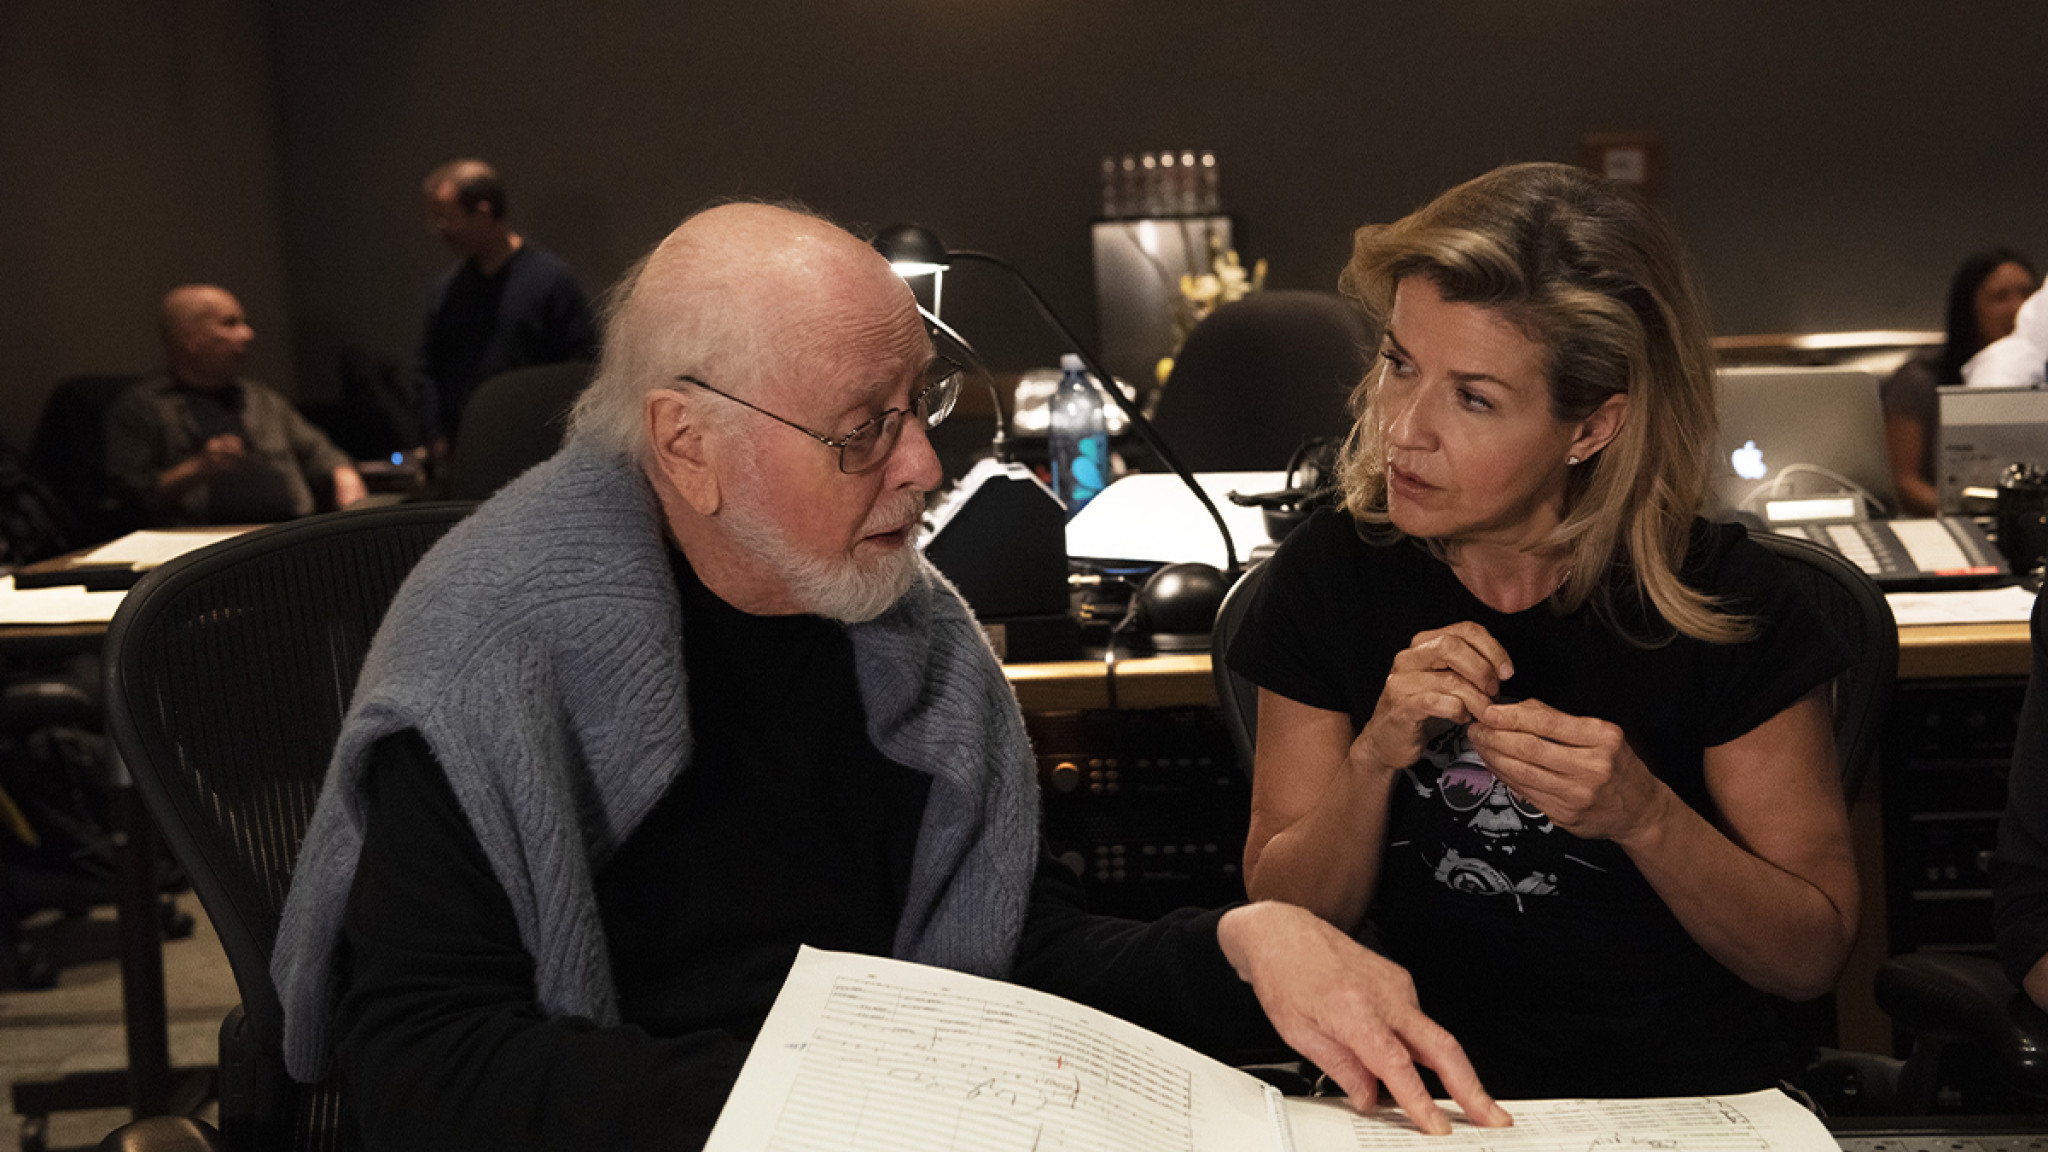 Anne-Sophie Mutter and John Williams present Across The Stars